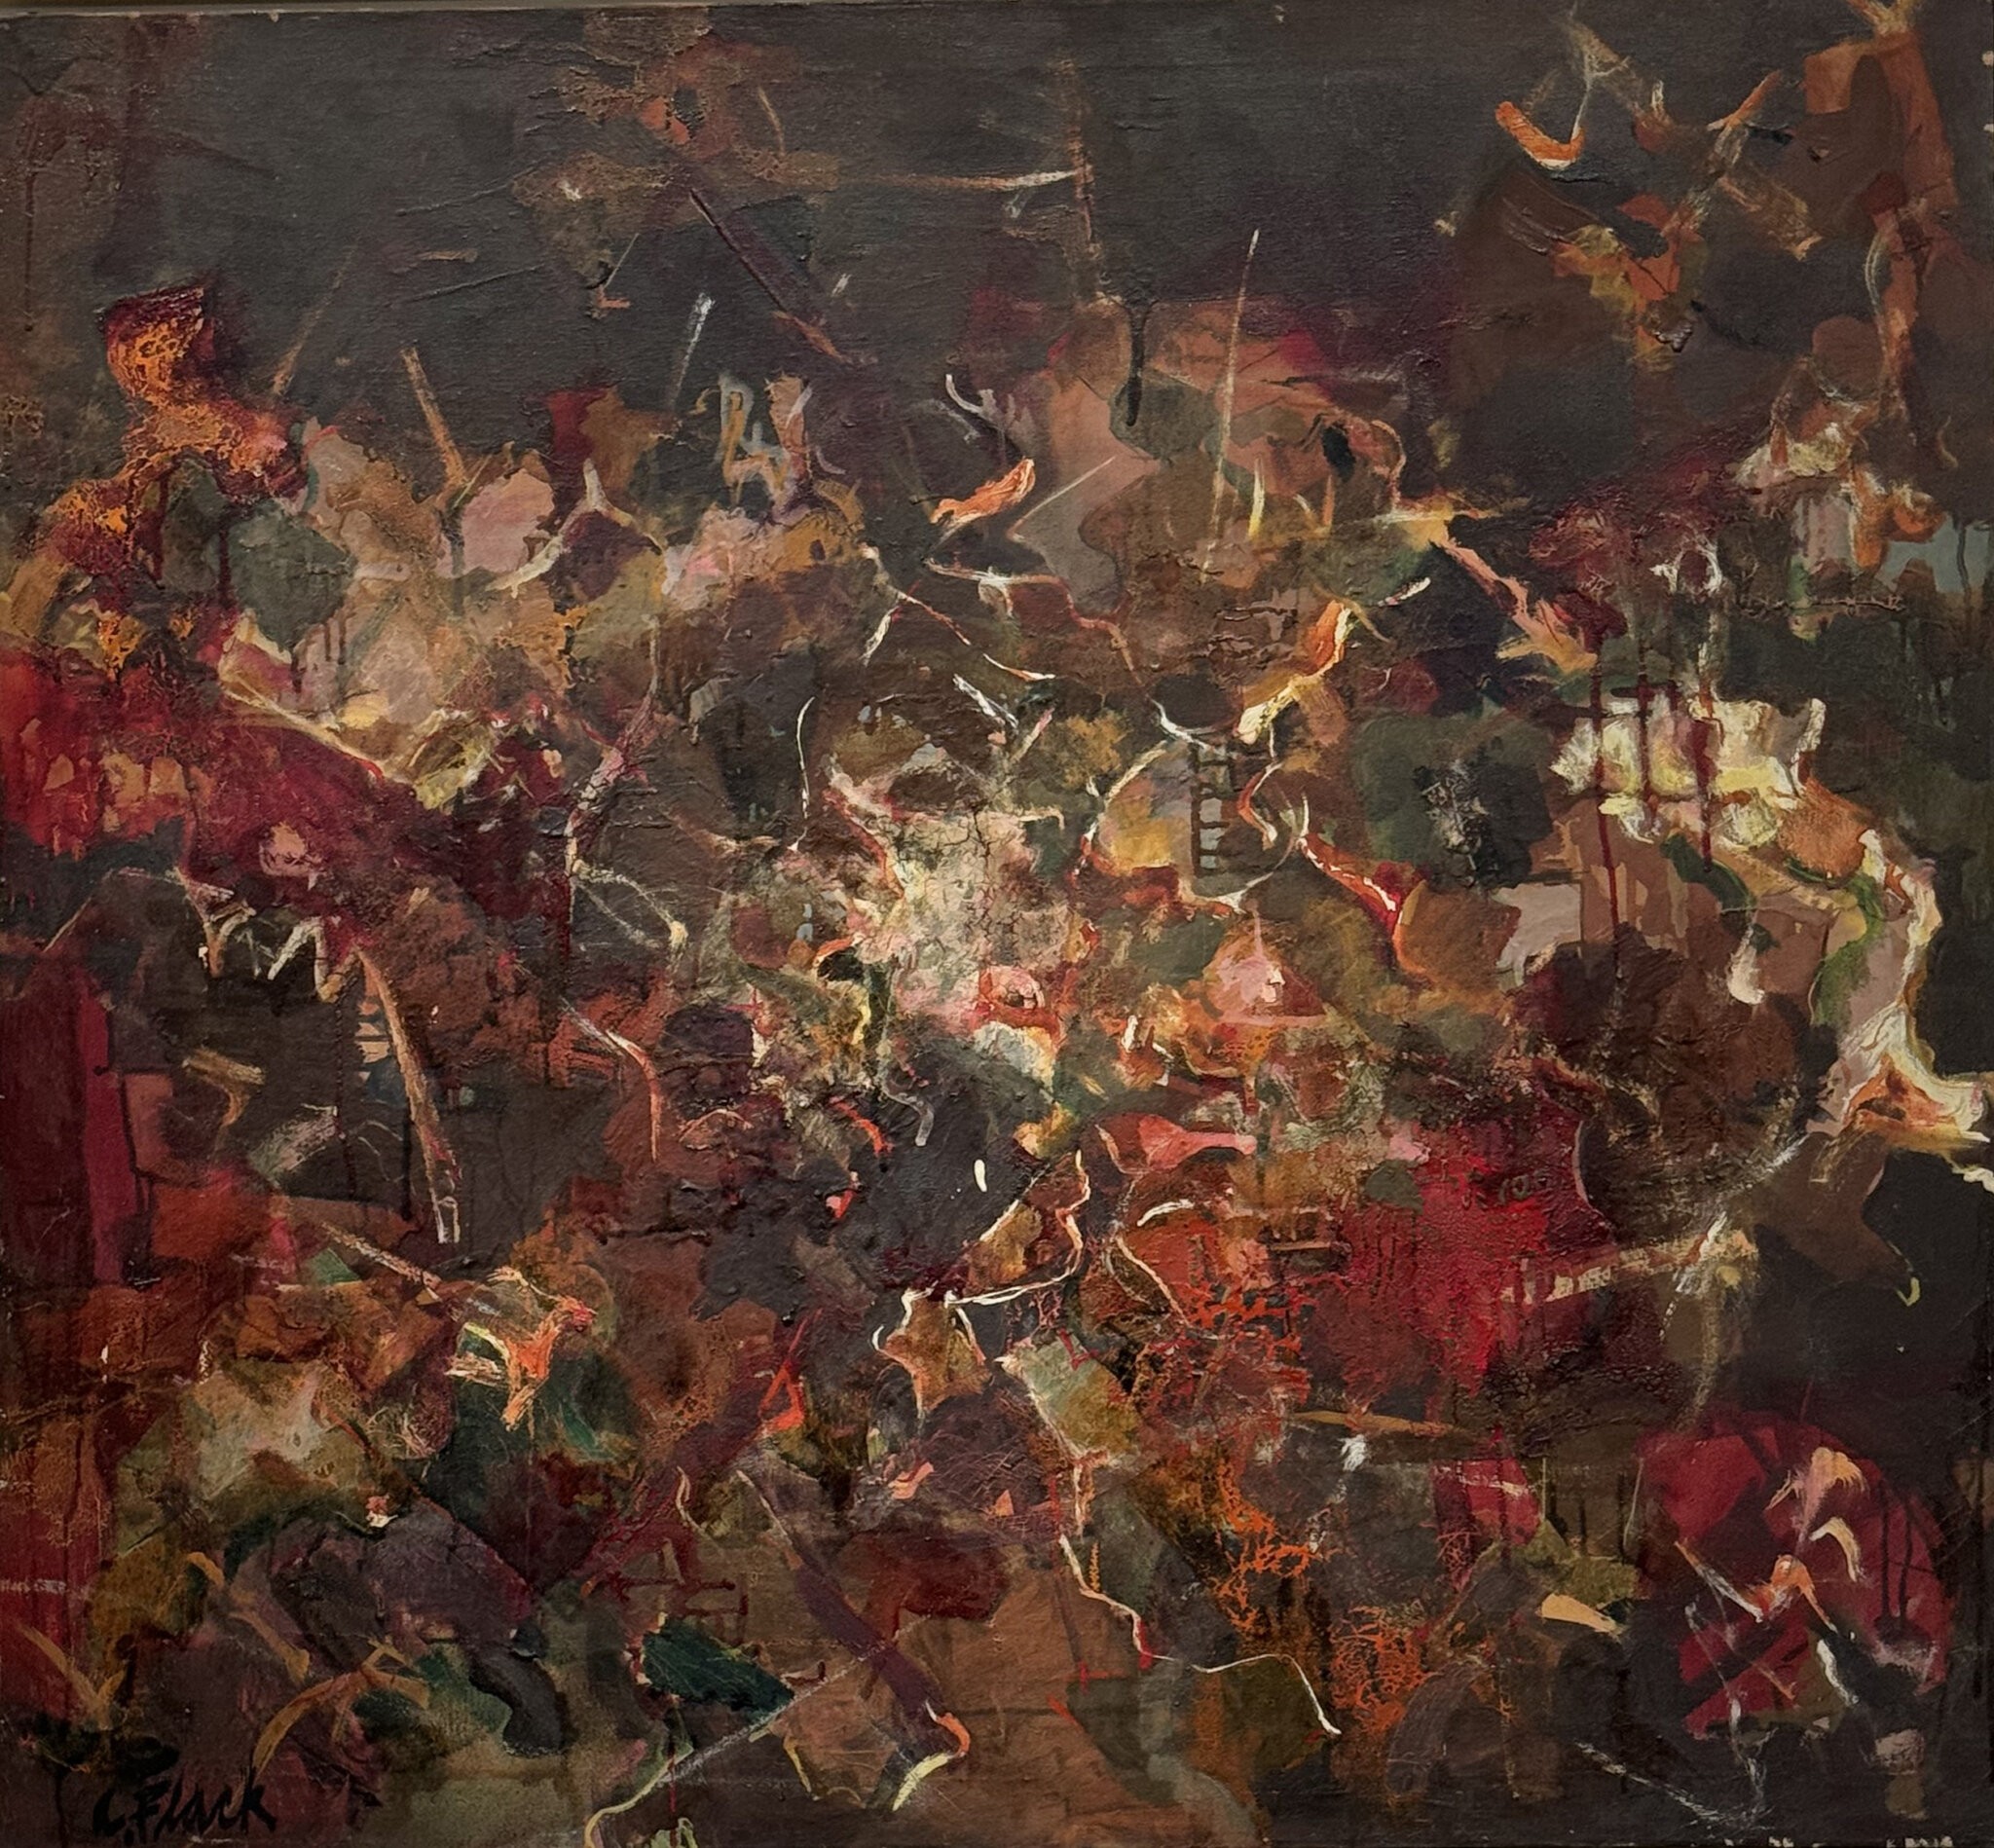 Audrey Flack's "Galaxies" (1952, oil on canvas, 40" x 42") on view at Southampton Arts Center.